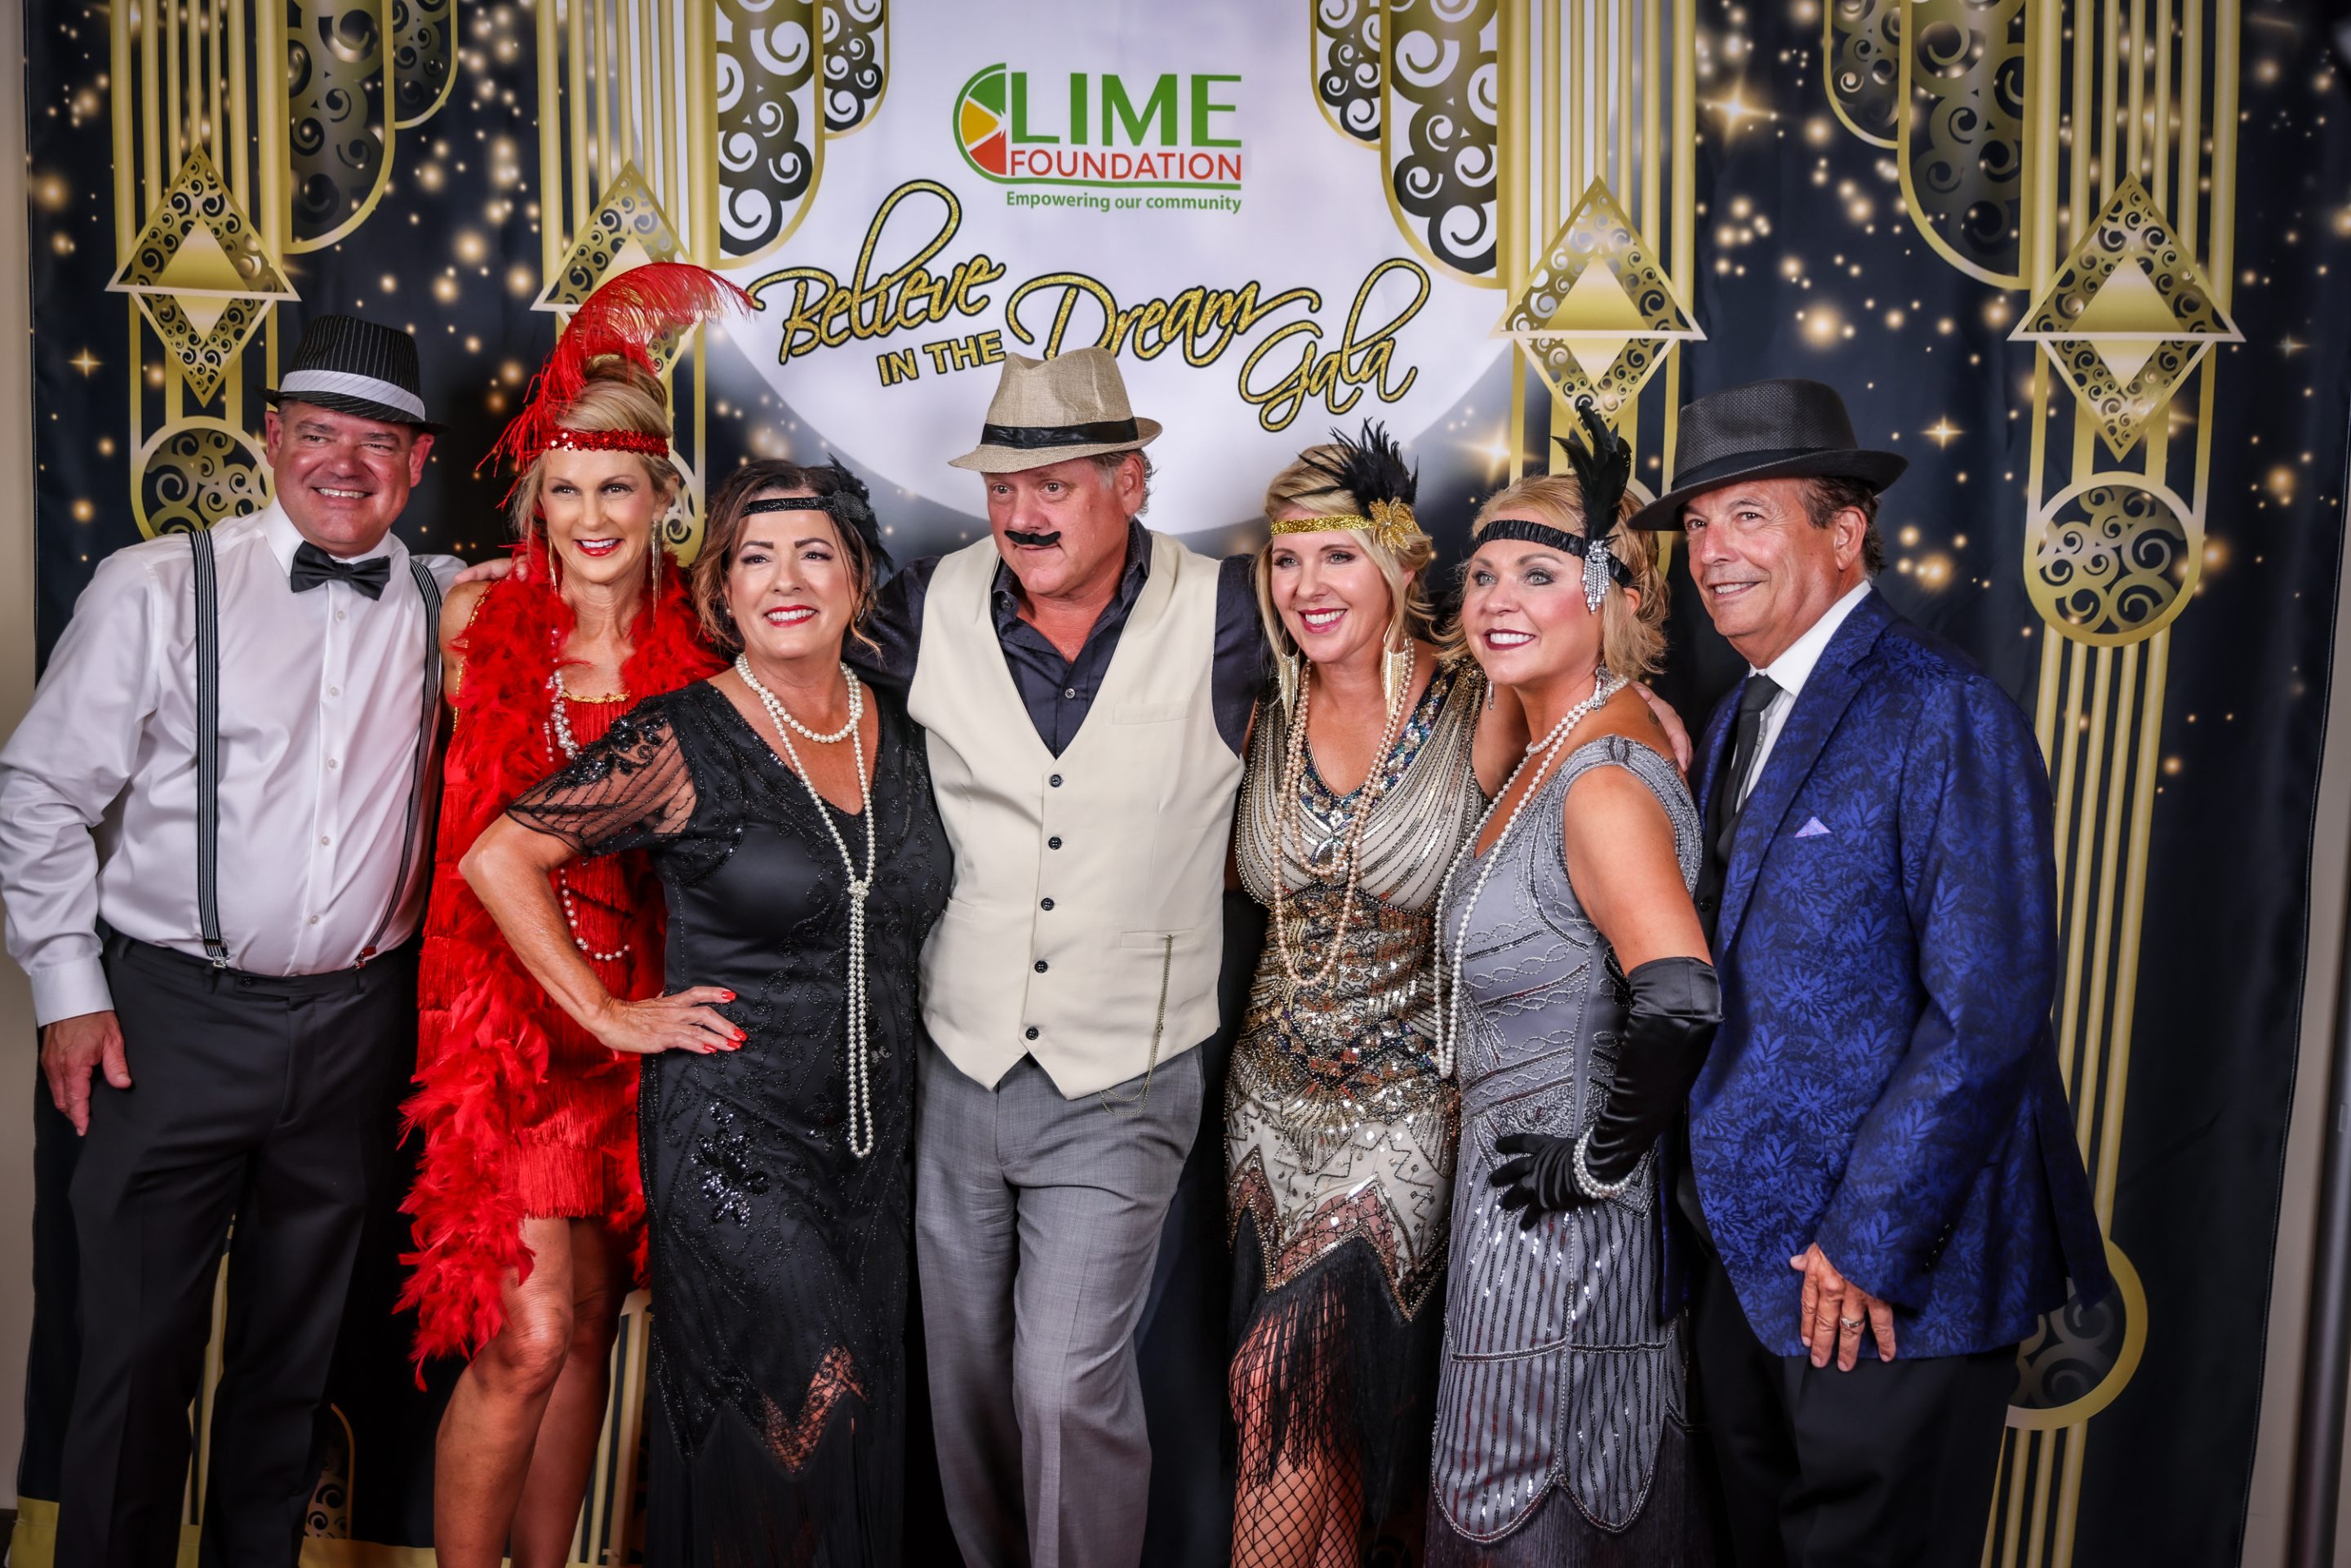 A group of people posing for a photo at a Gatsby themed party hosted by a Sonoma County non-profit organization.